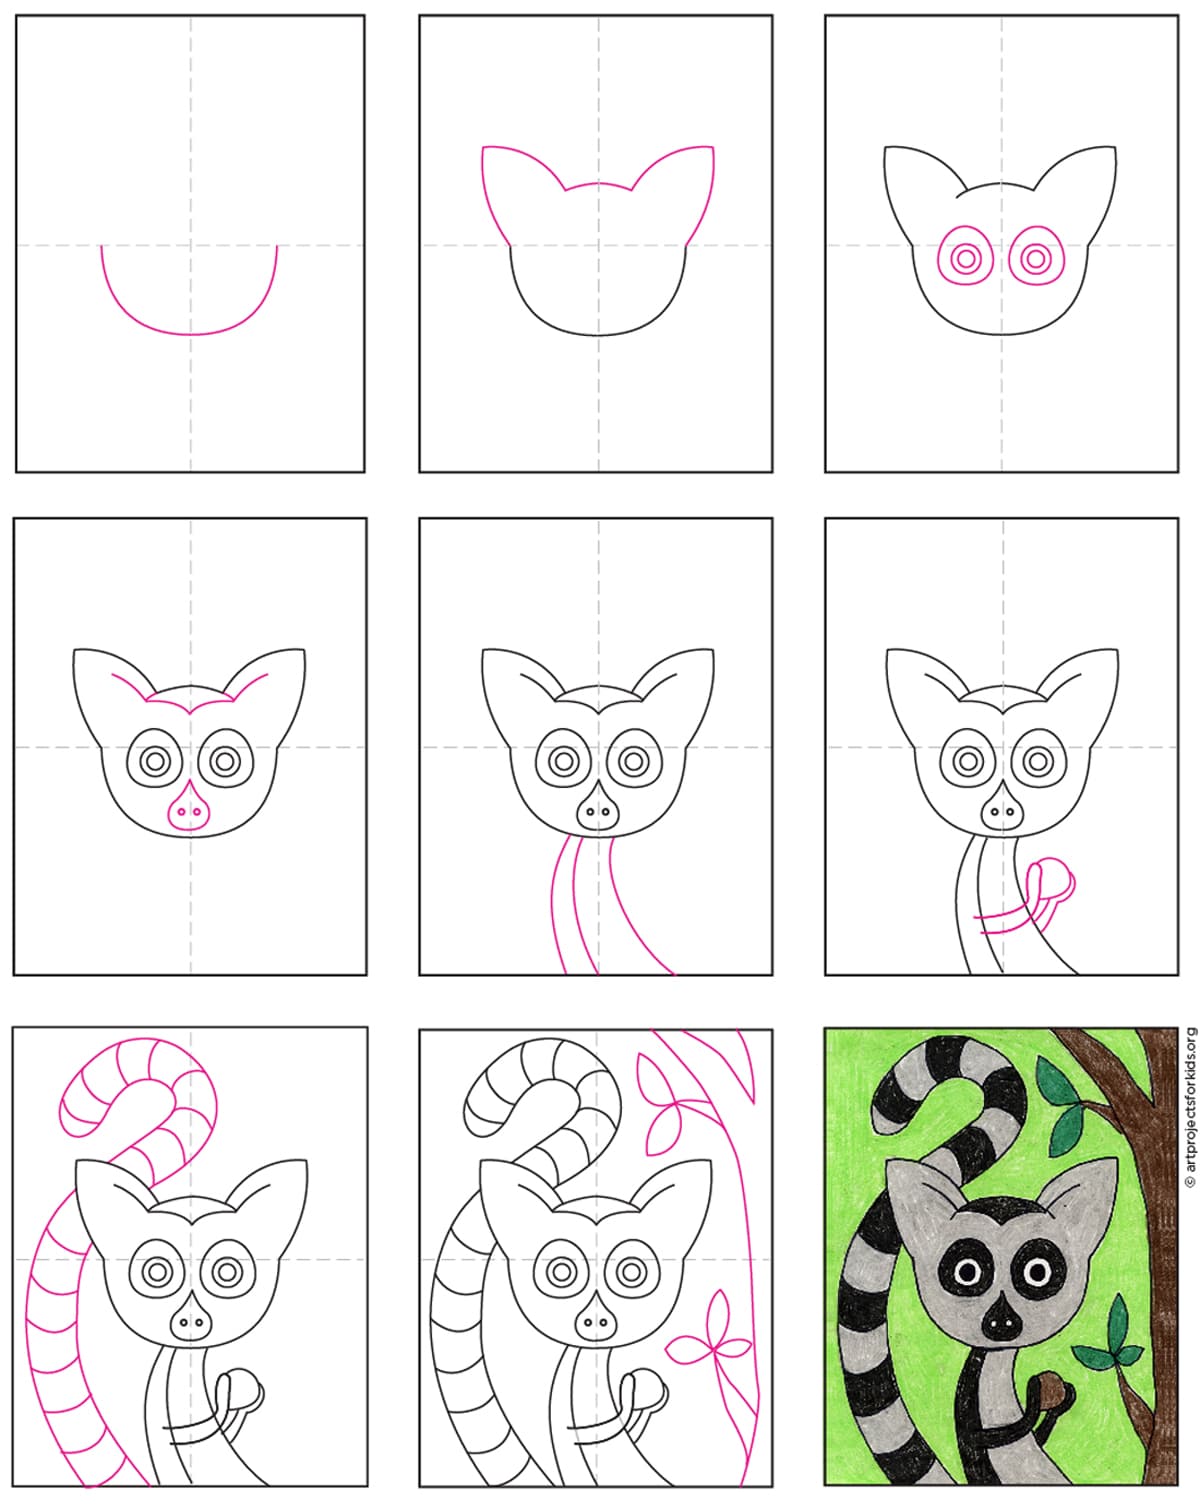 How to Draw a Lemur · Art Projects for Kids